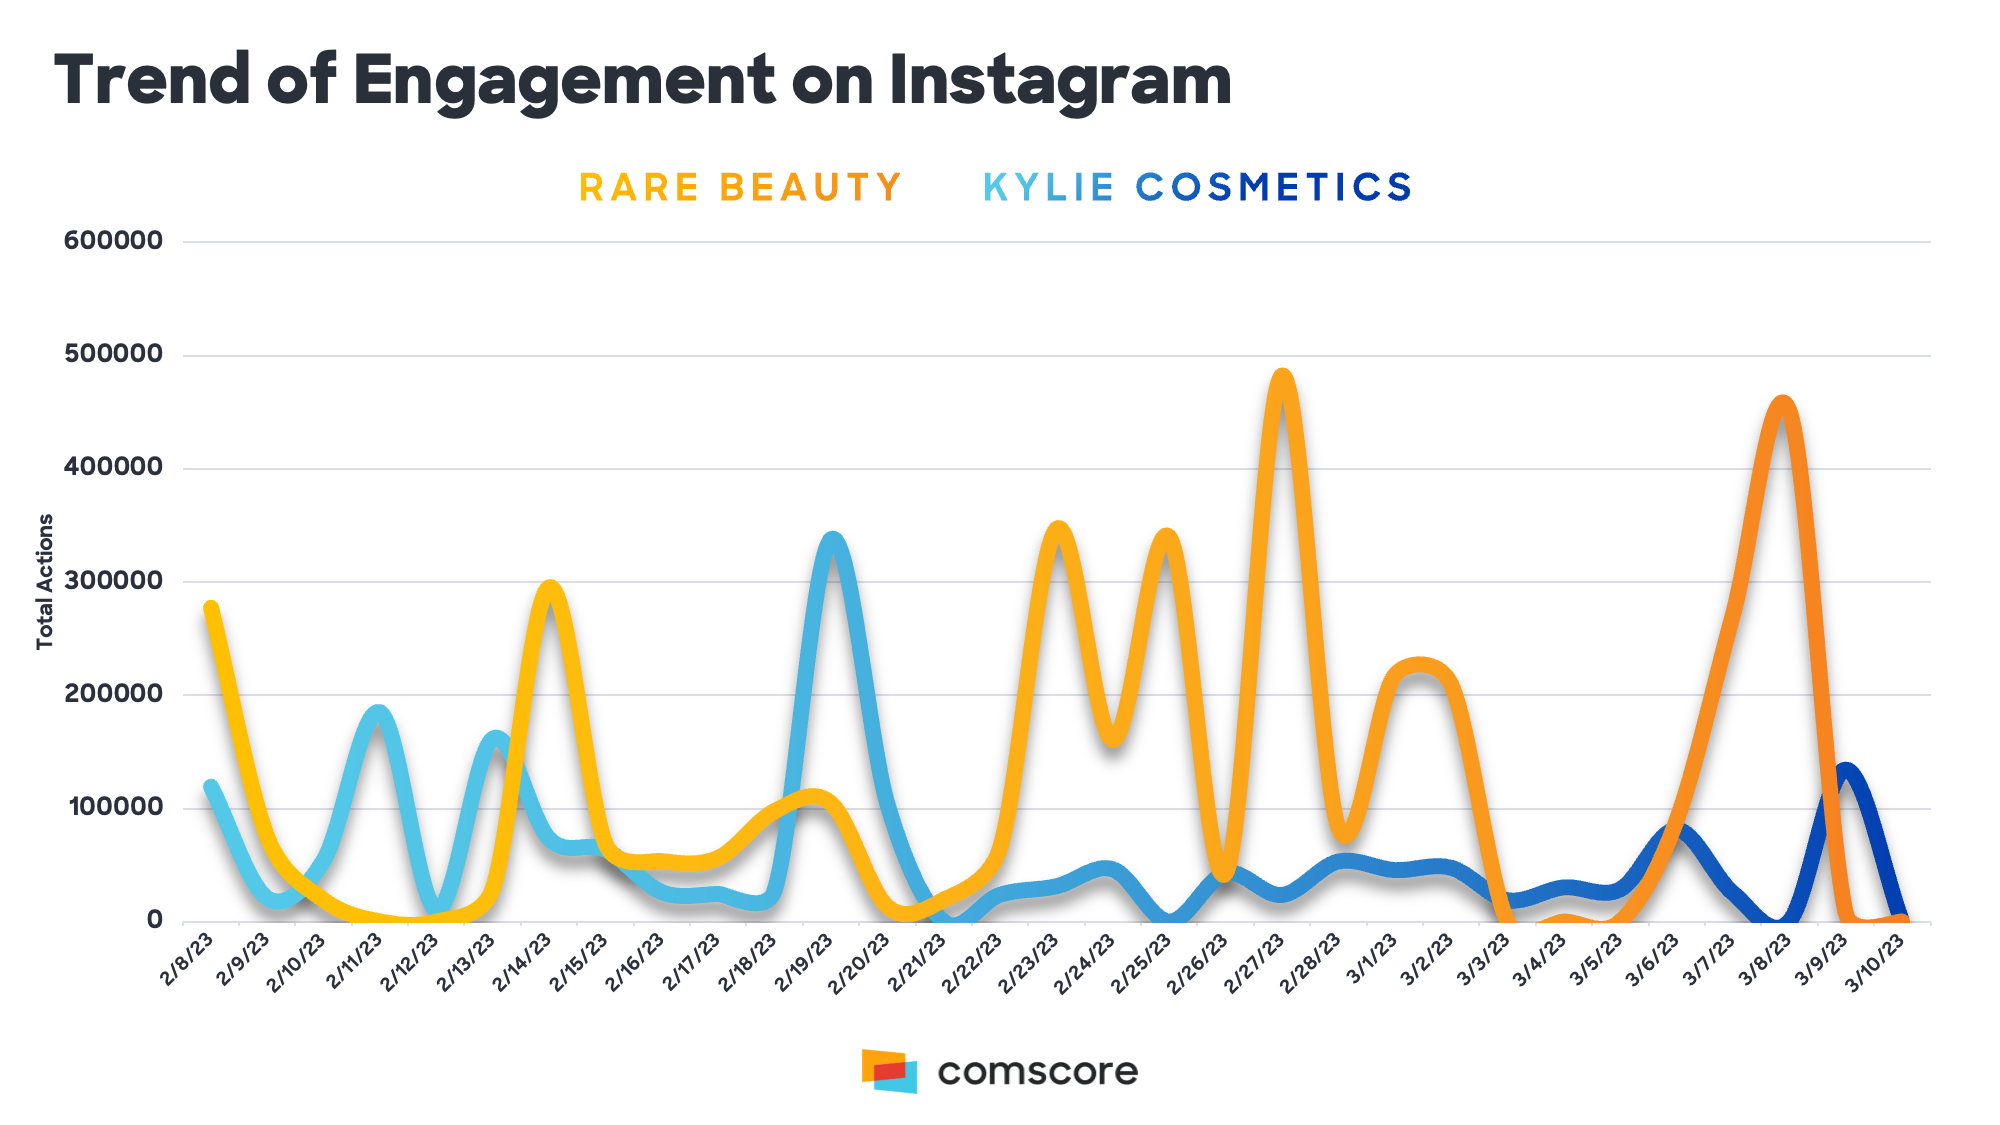 Trends in engagement on Instagram